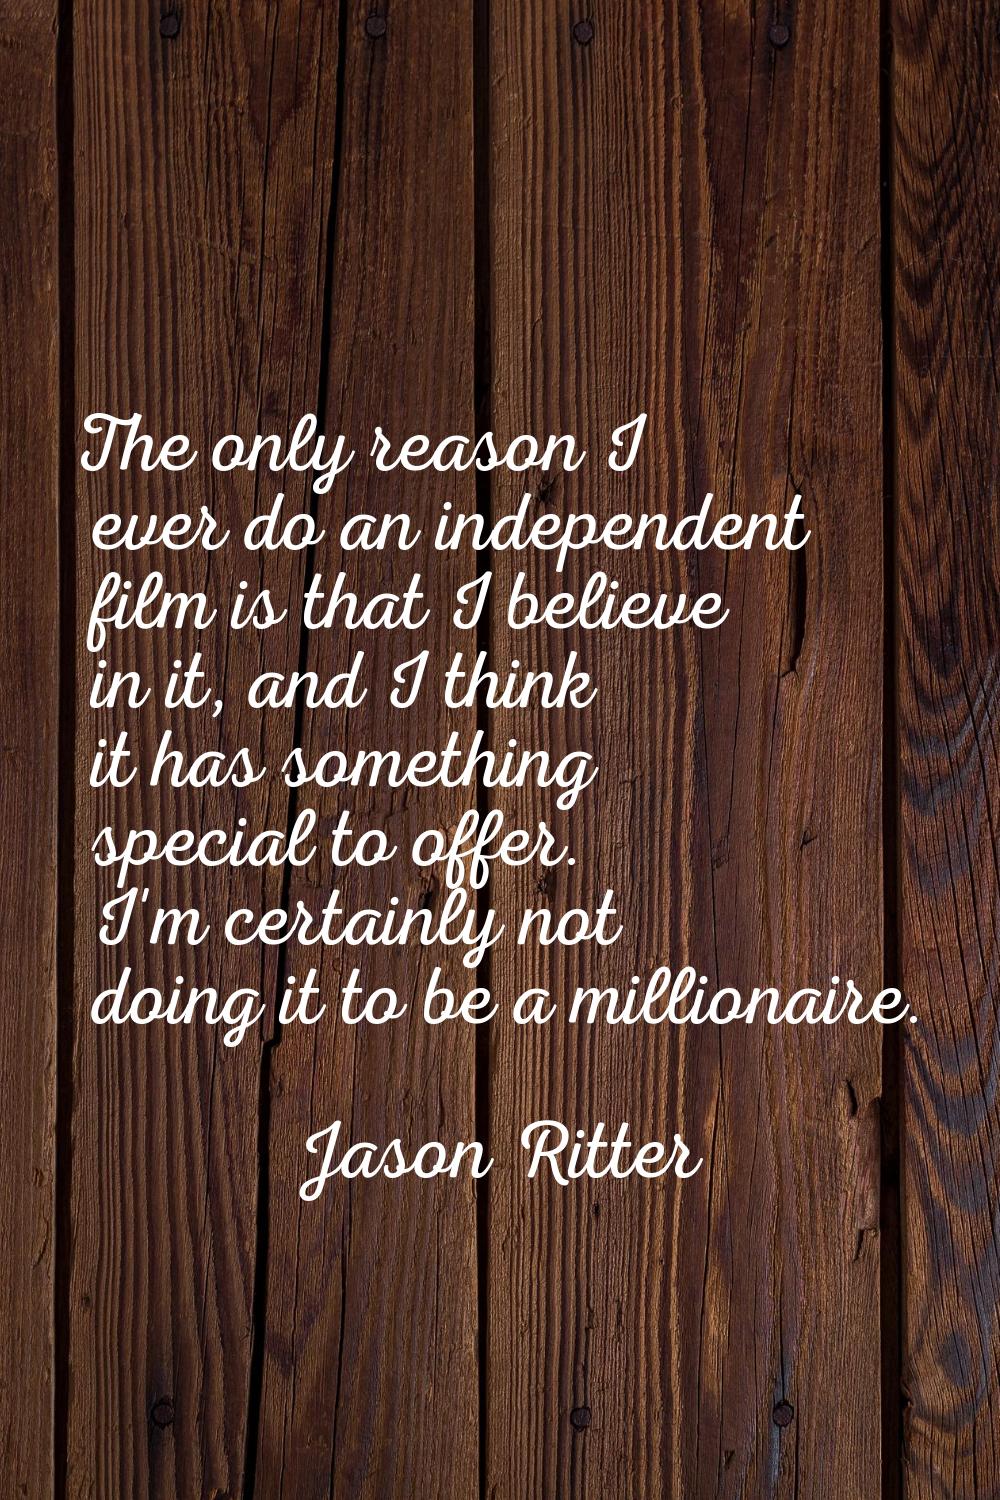 The only reason I ever do an independent film is that I believe in it, and I think it has something